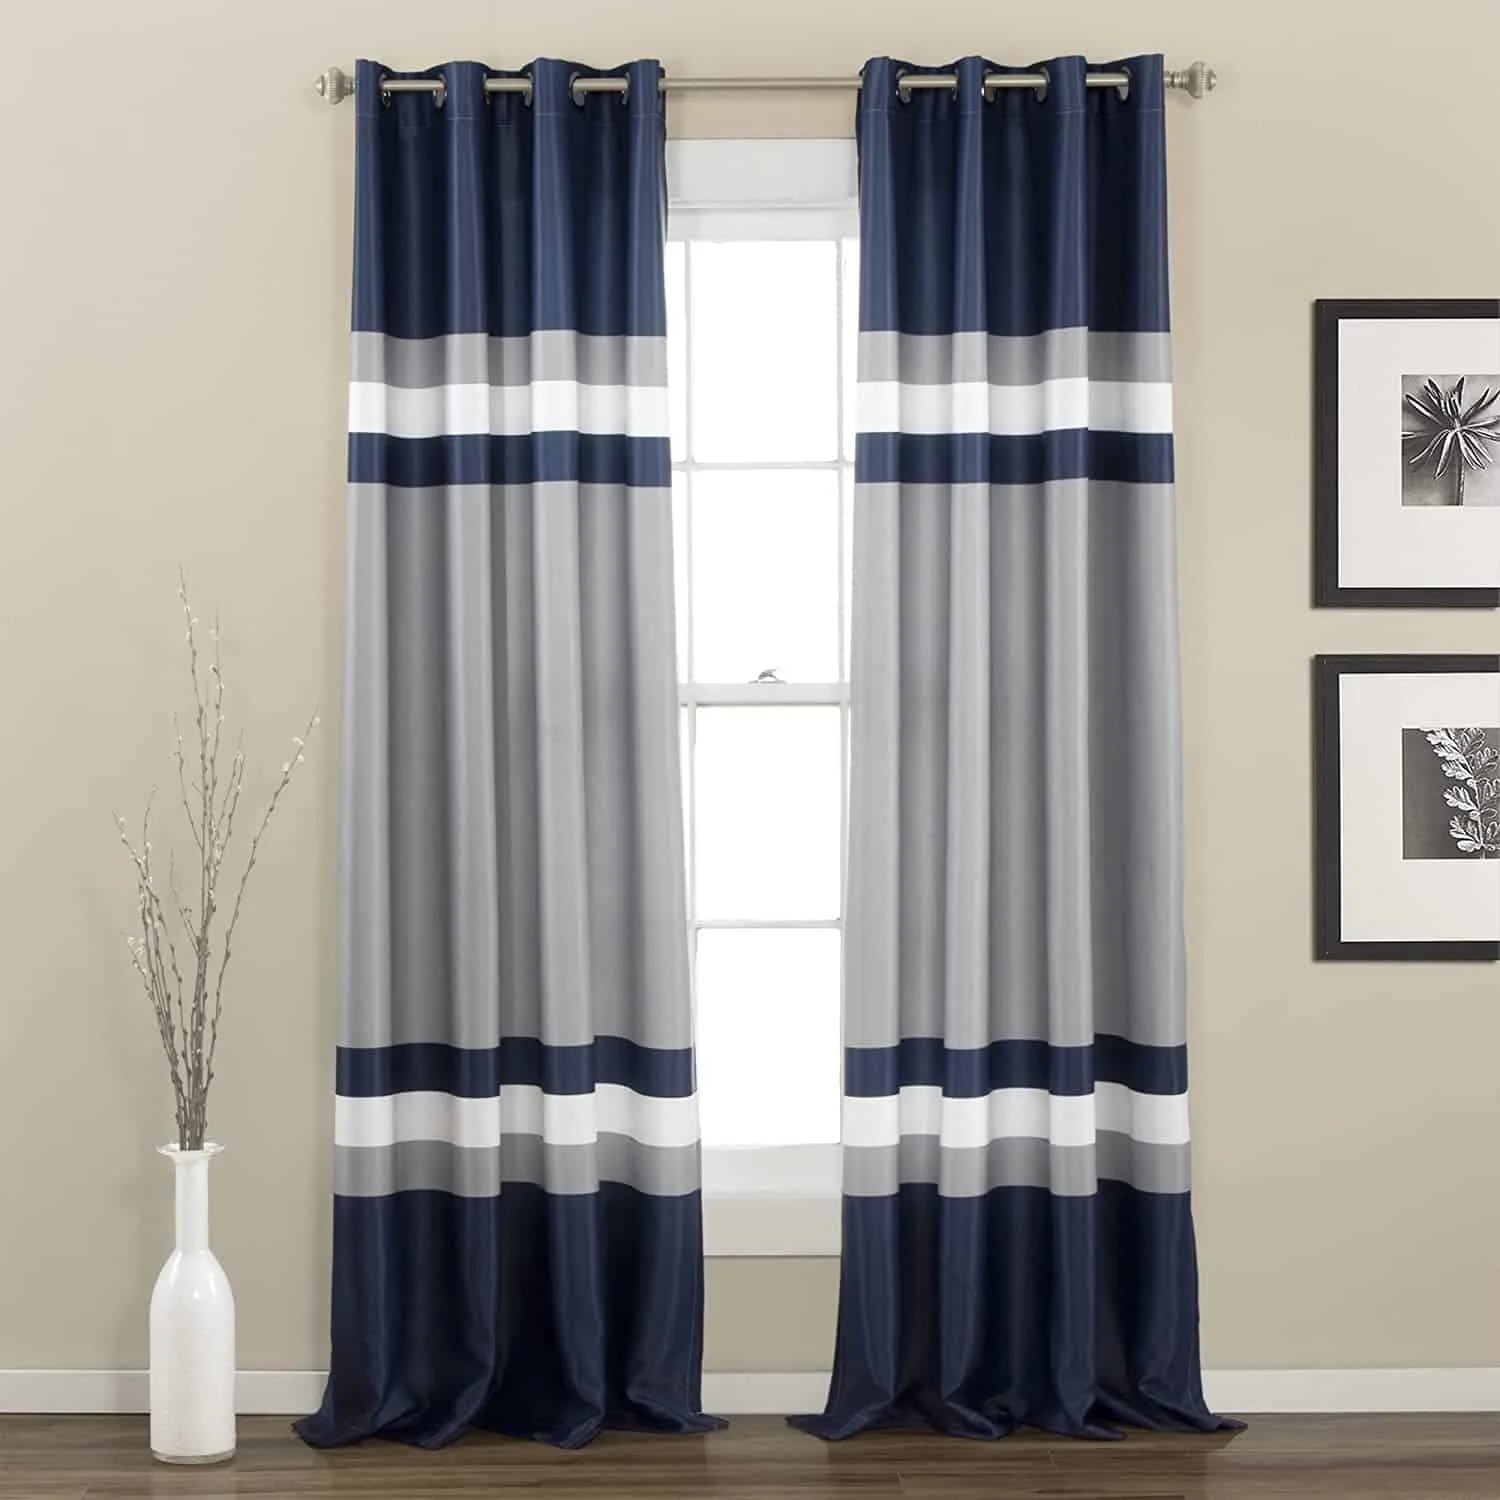 gray, navy blue and white striped full length curtains